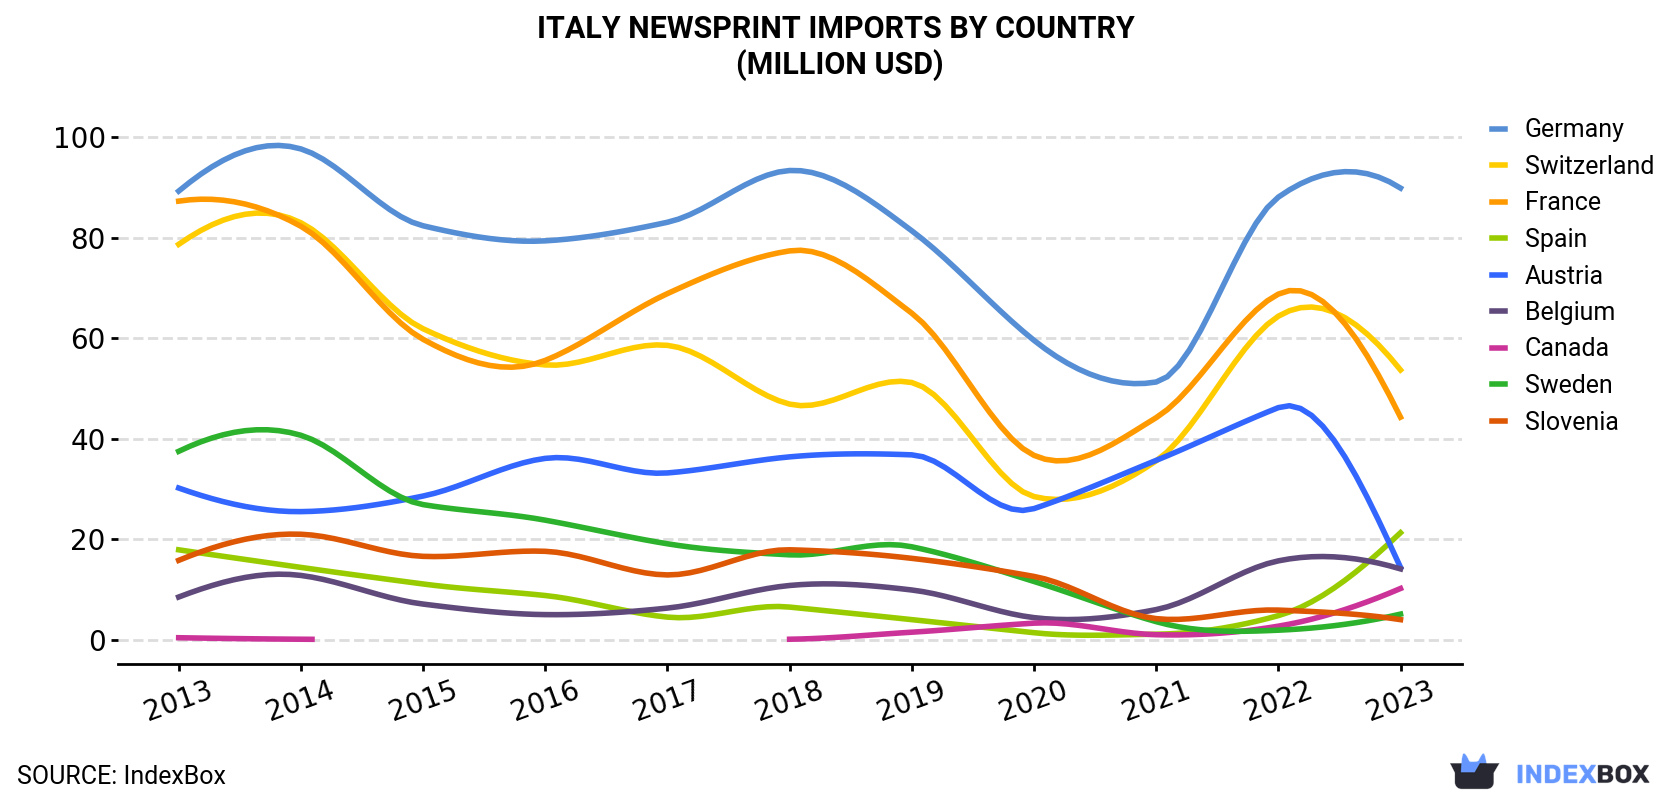 Italy Newsprint Imports By Country (Million USD)